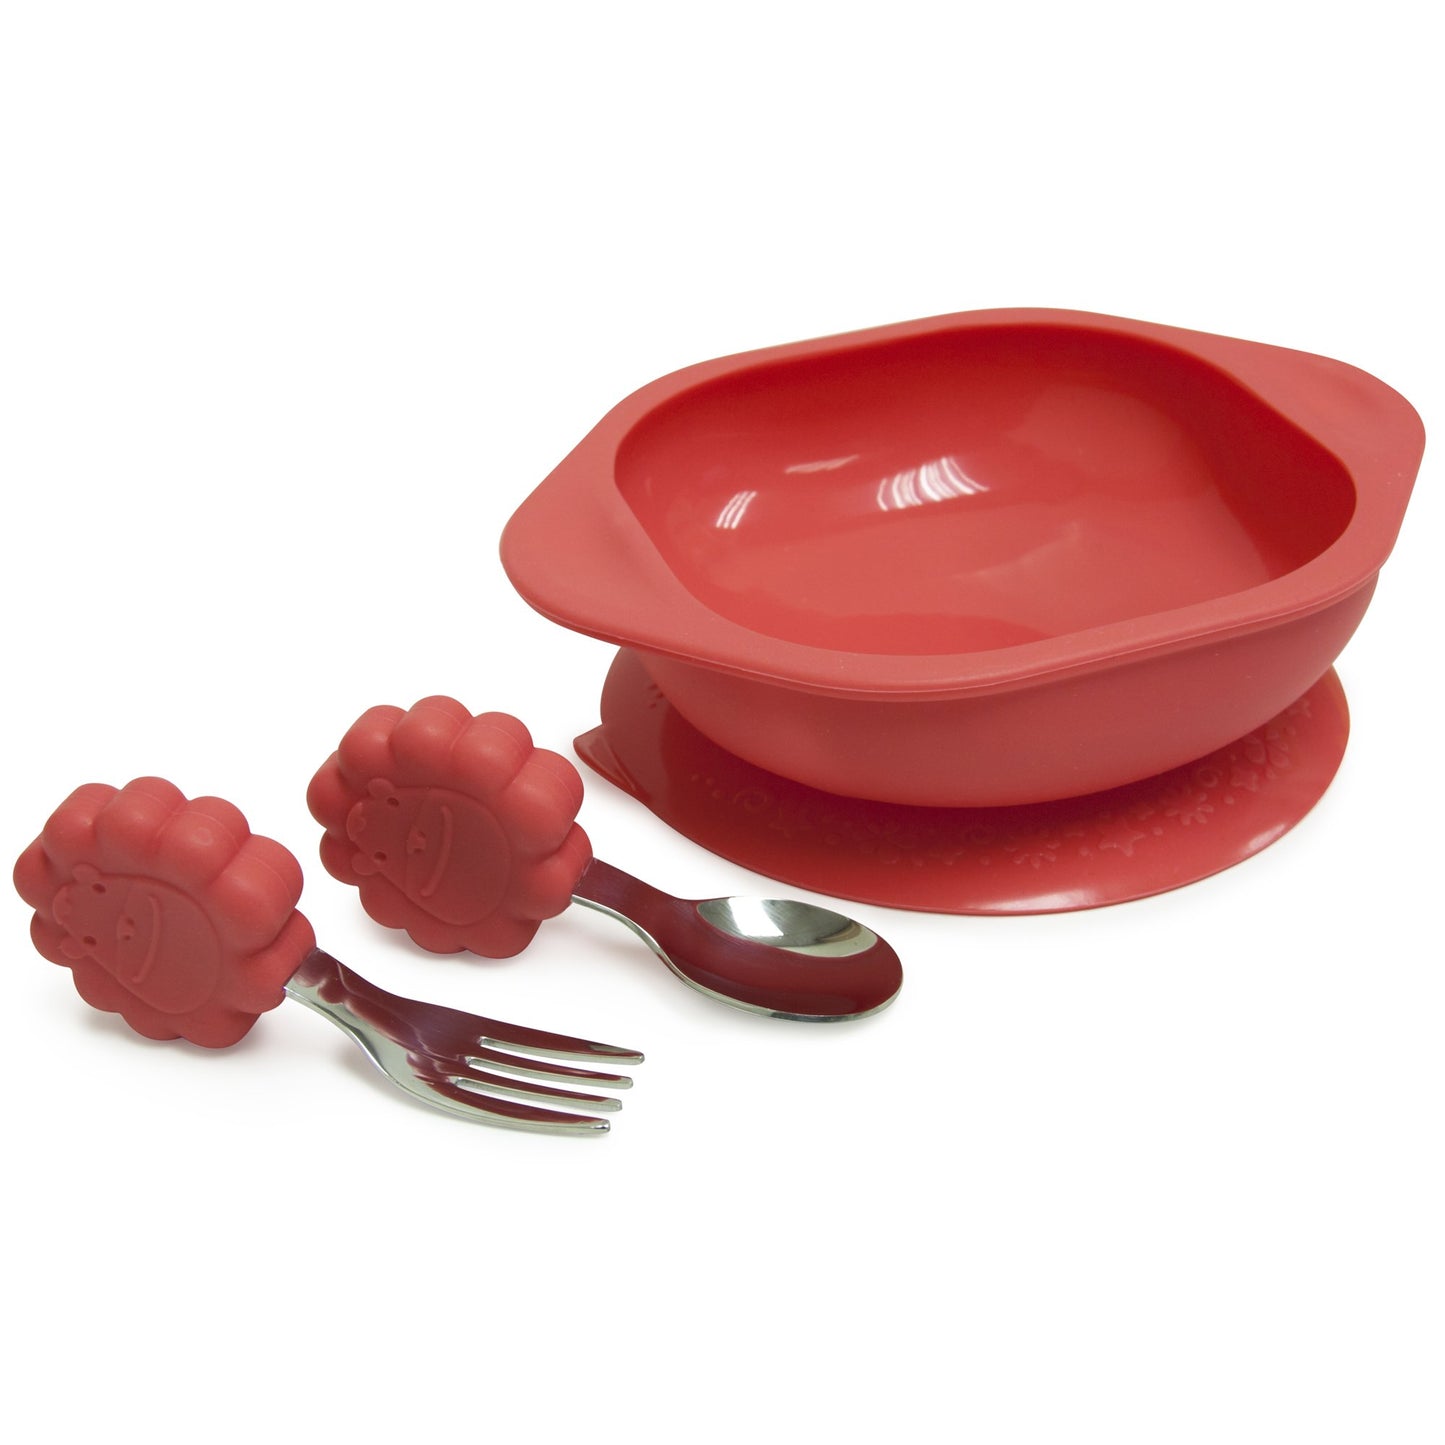 Marcus & Marcus Mealtime Set